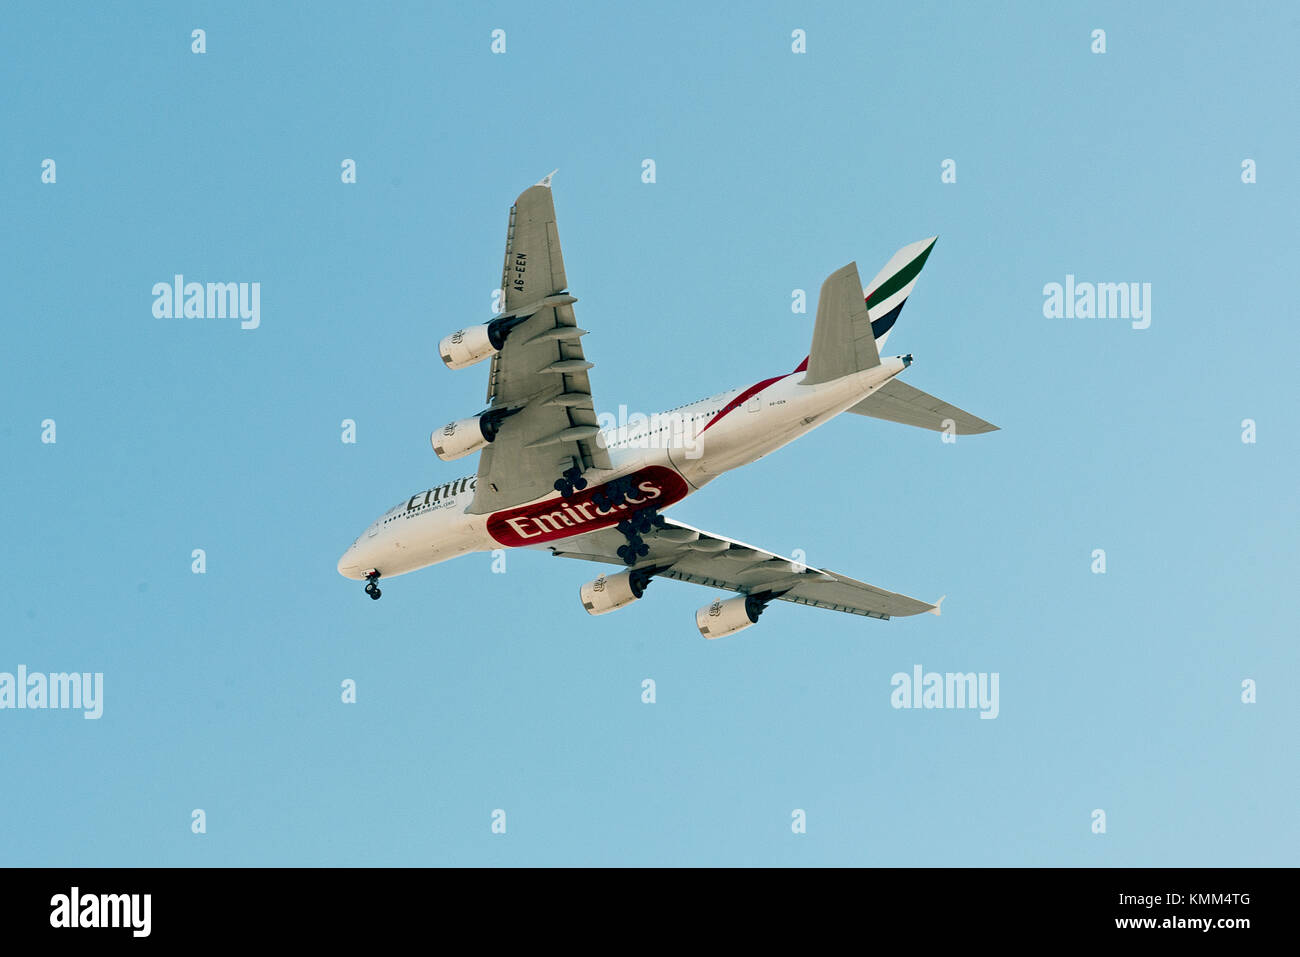 Emirates Airbus A380 on glide path to landing at Jeddah International airport. Quick photo taken from street level in district under flight-path. Stock Photo